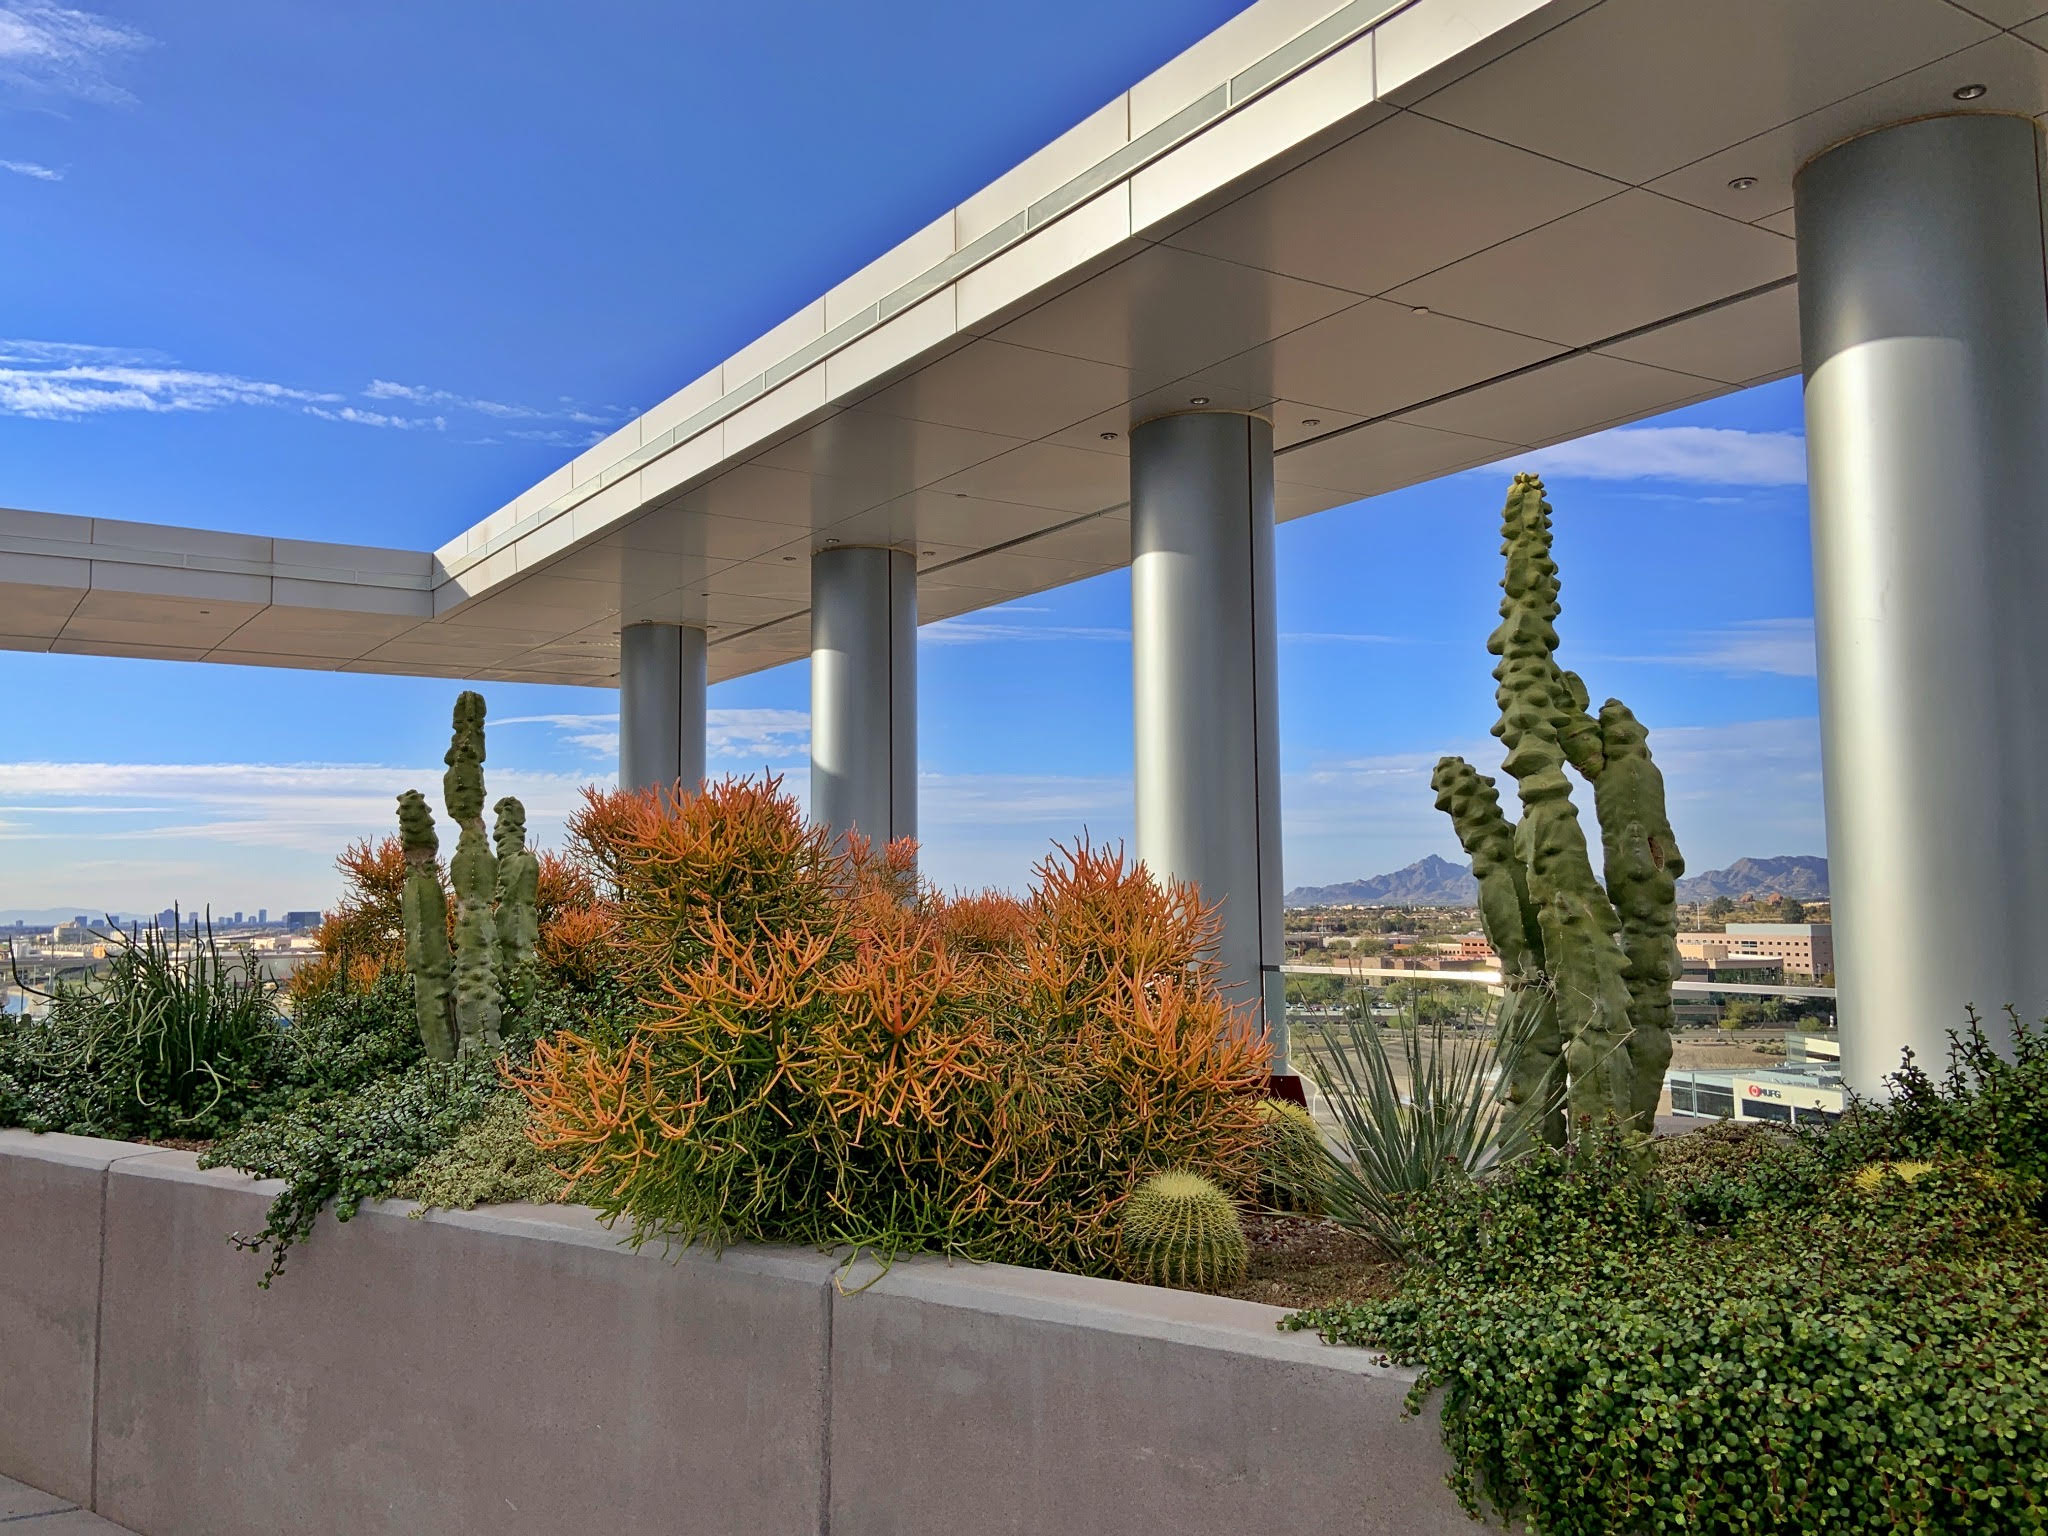 Photo of Biophilic Design found a the The Grand at Papago Park Center